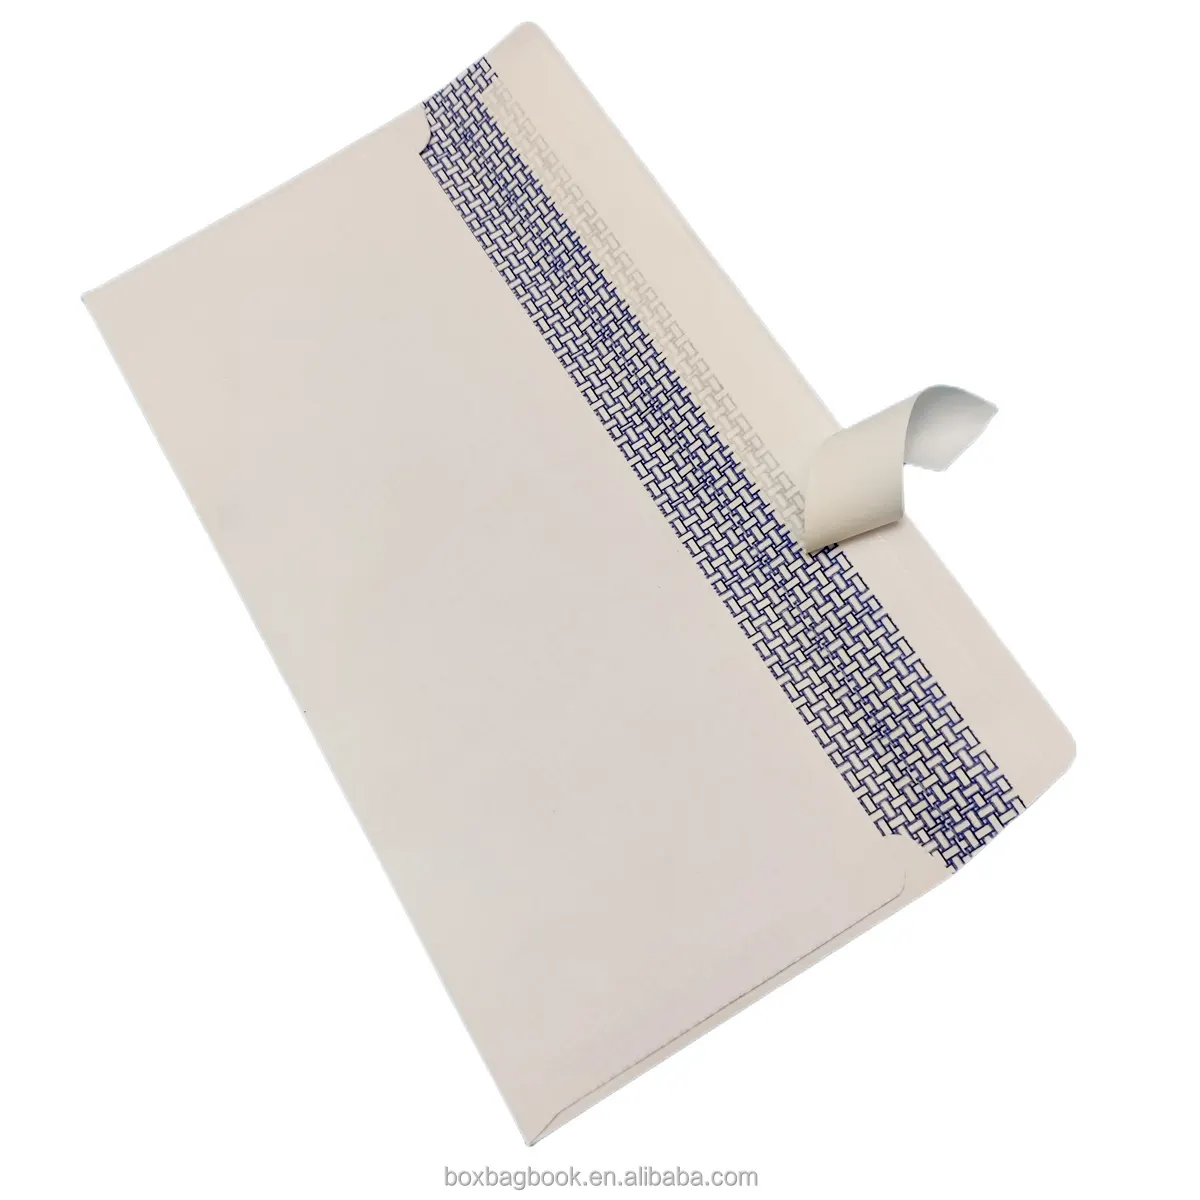 Buy Postal Envelope Custom Made Blank Post Cards With Amazon Packaging Clear Window A4 NO. 10 Mailing Envelopes For Shipping